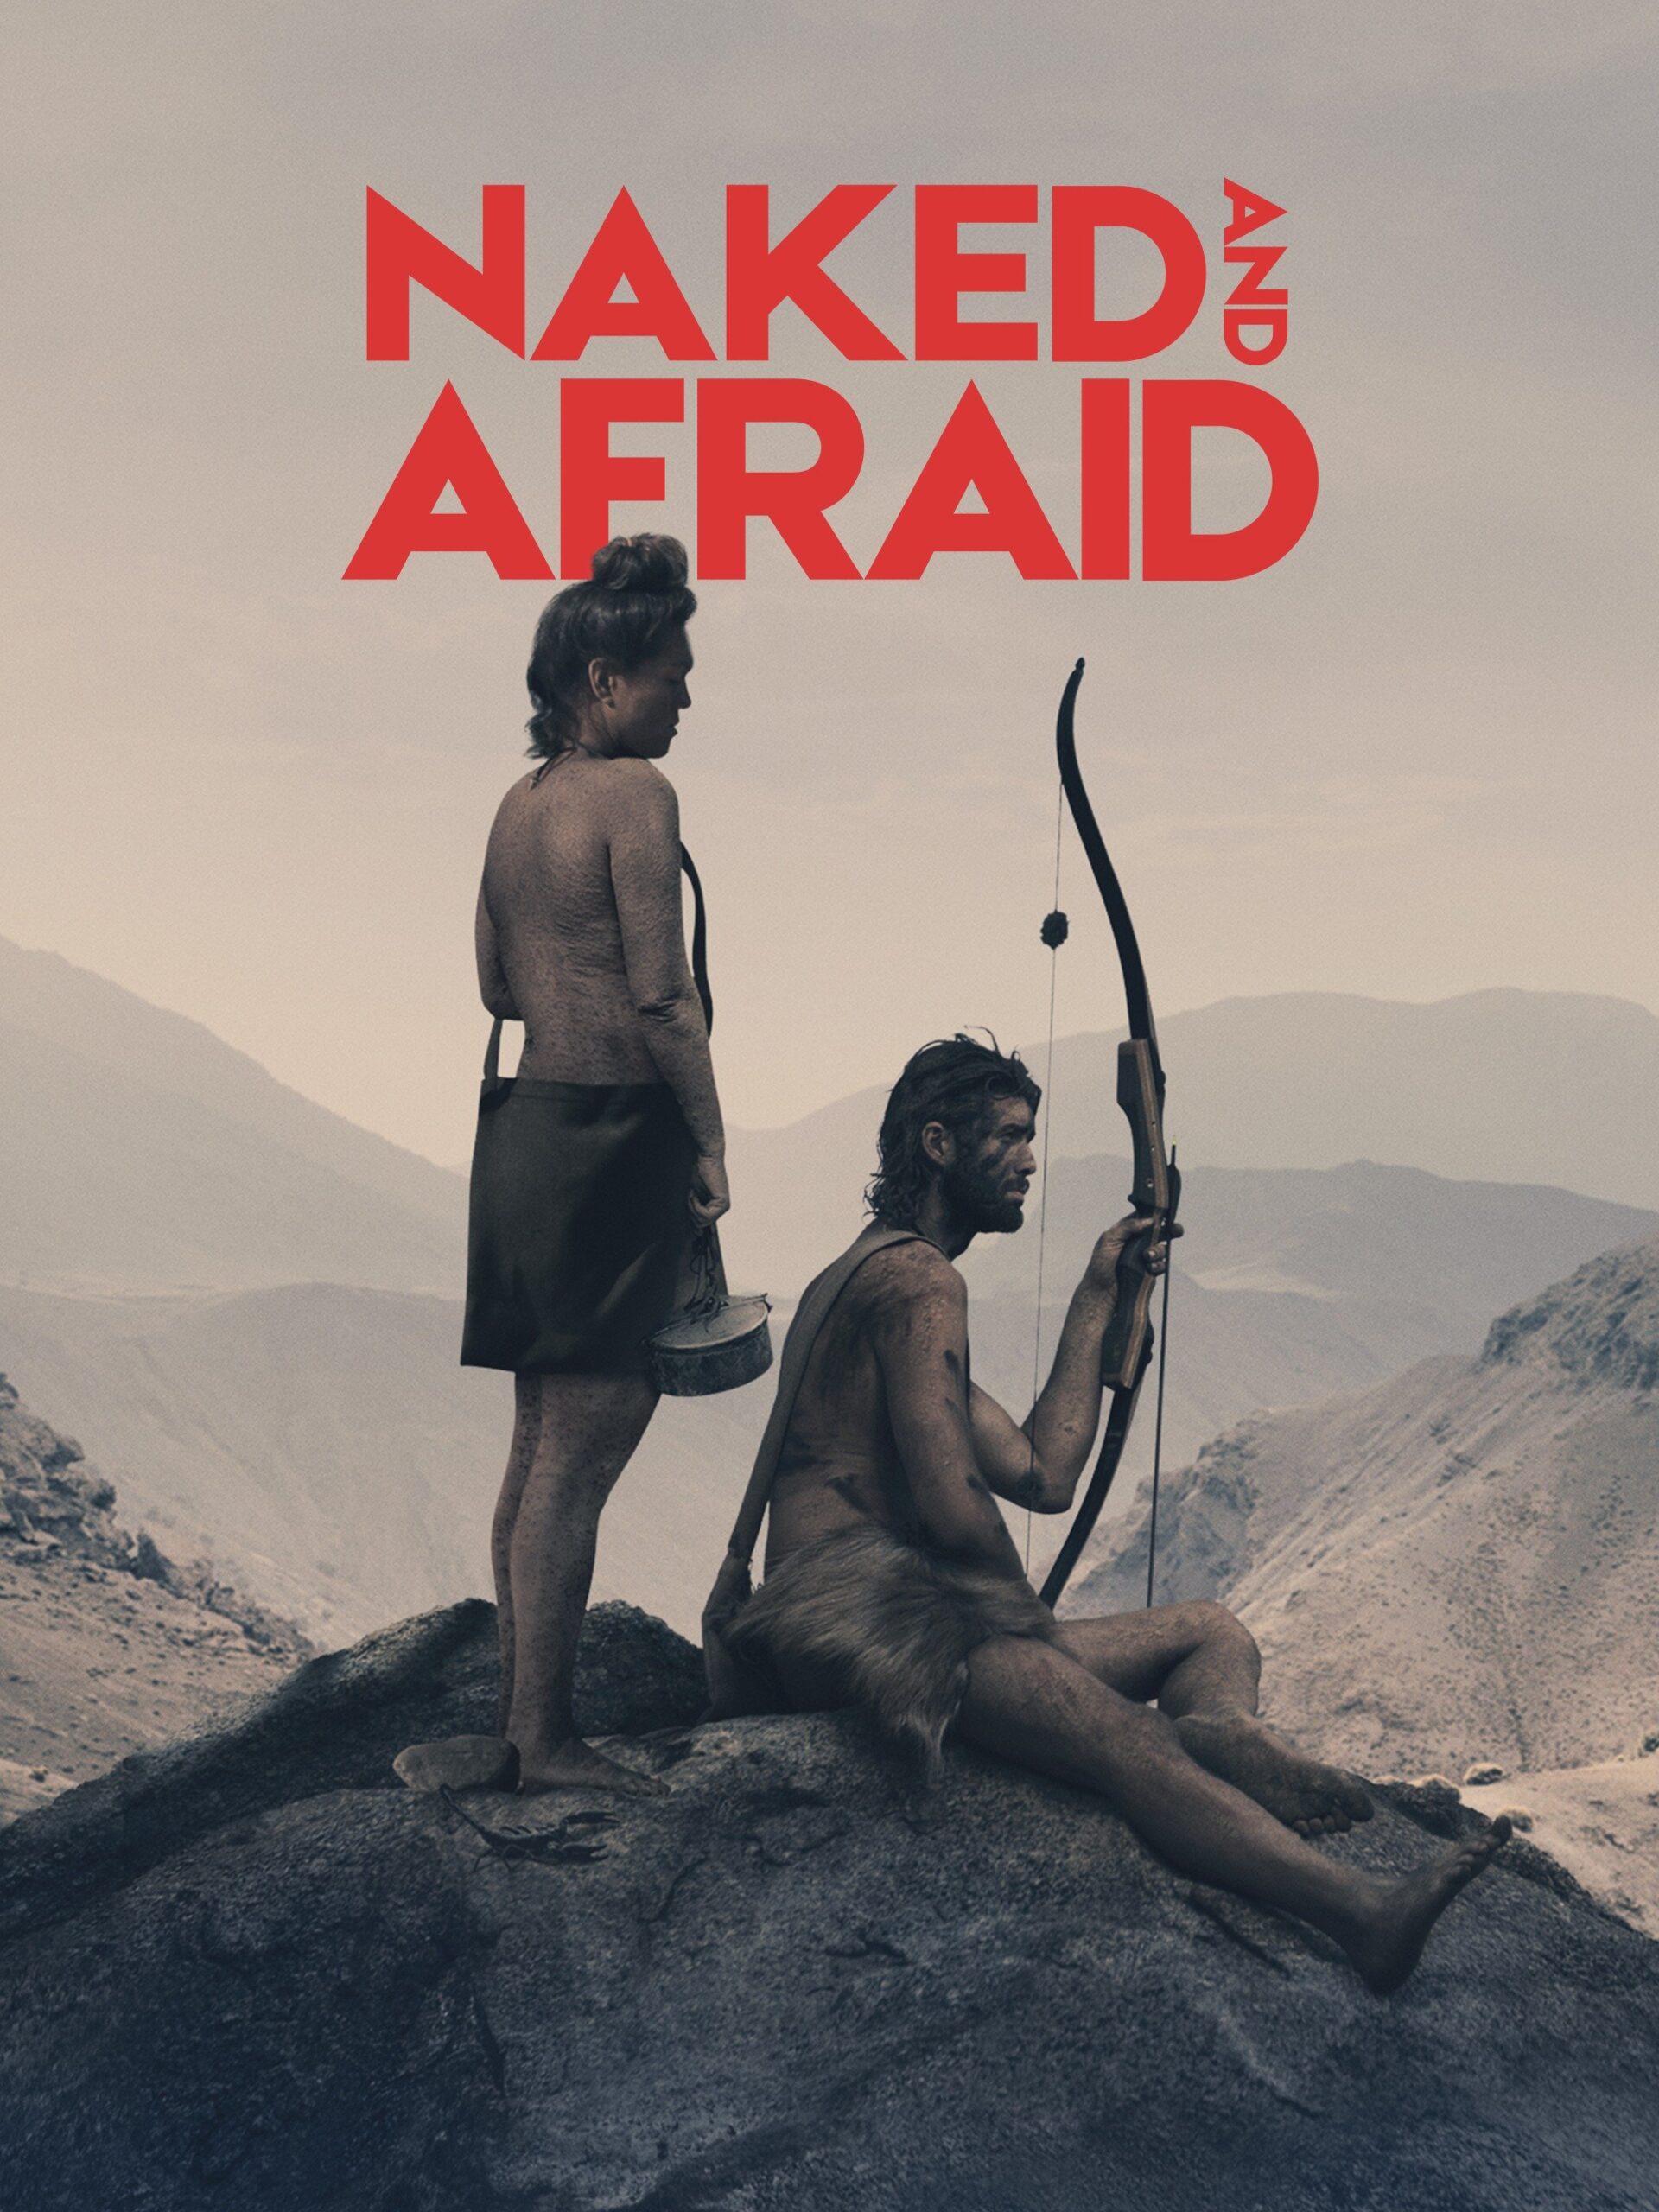 Naked & Afraid amongst Discovery Channel and Animal Planet October Programming Highlights